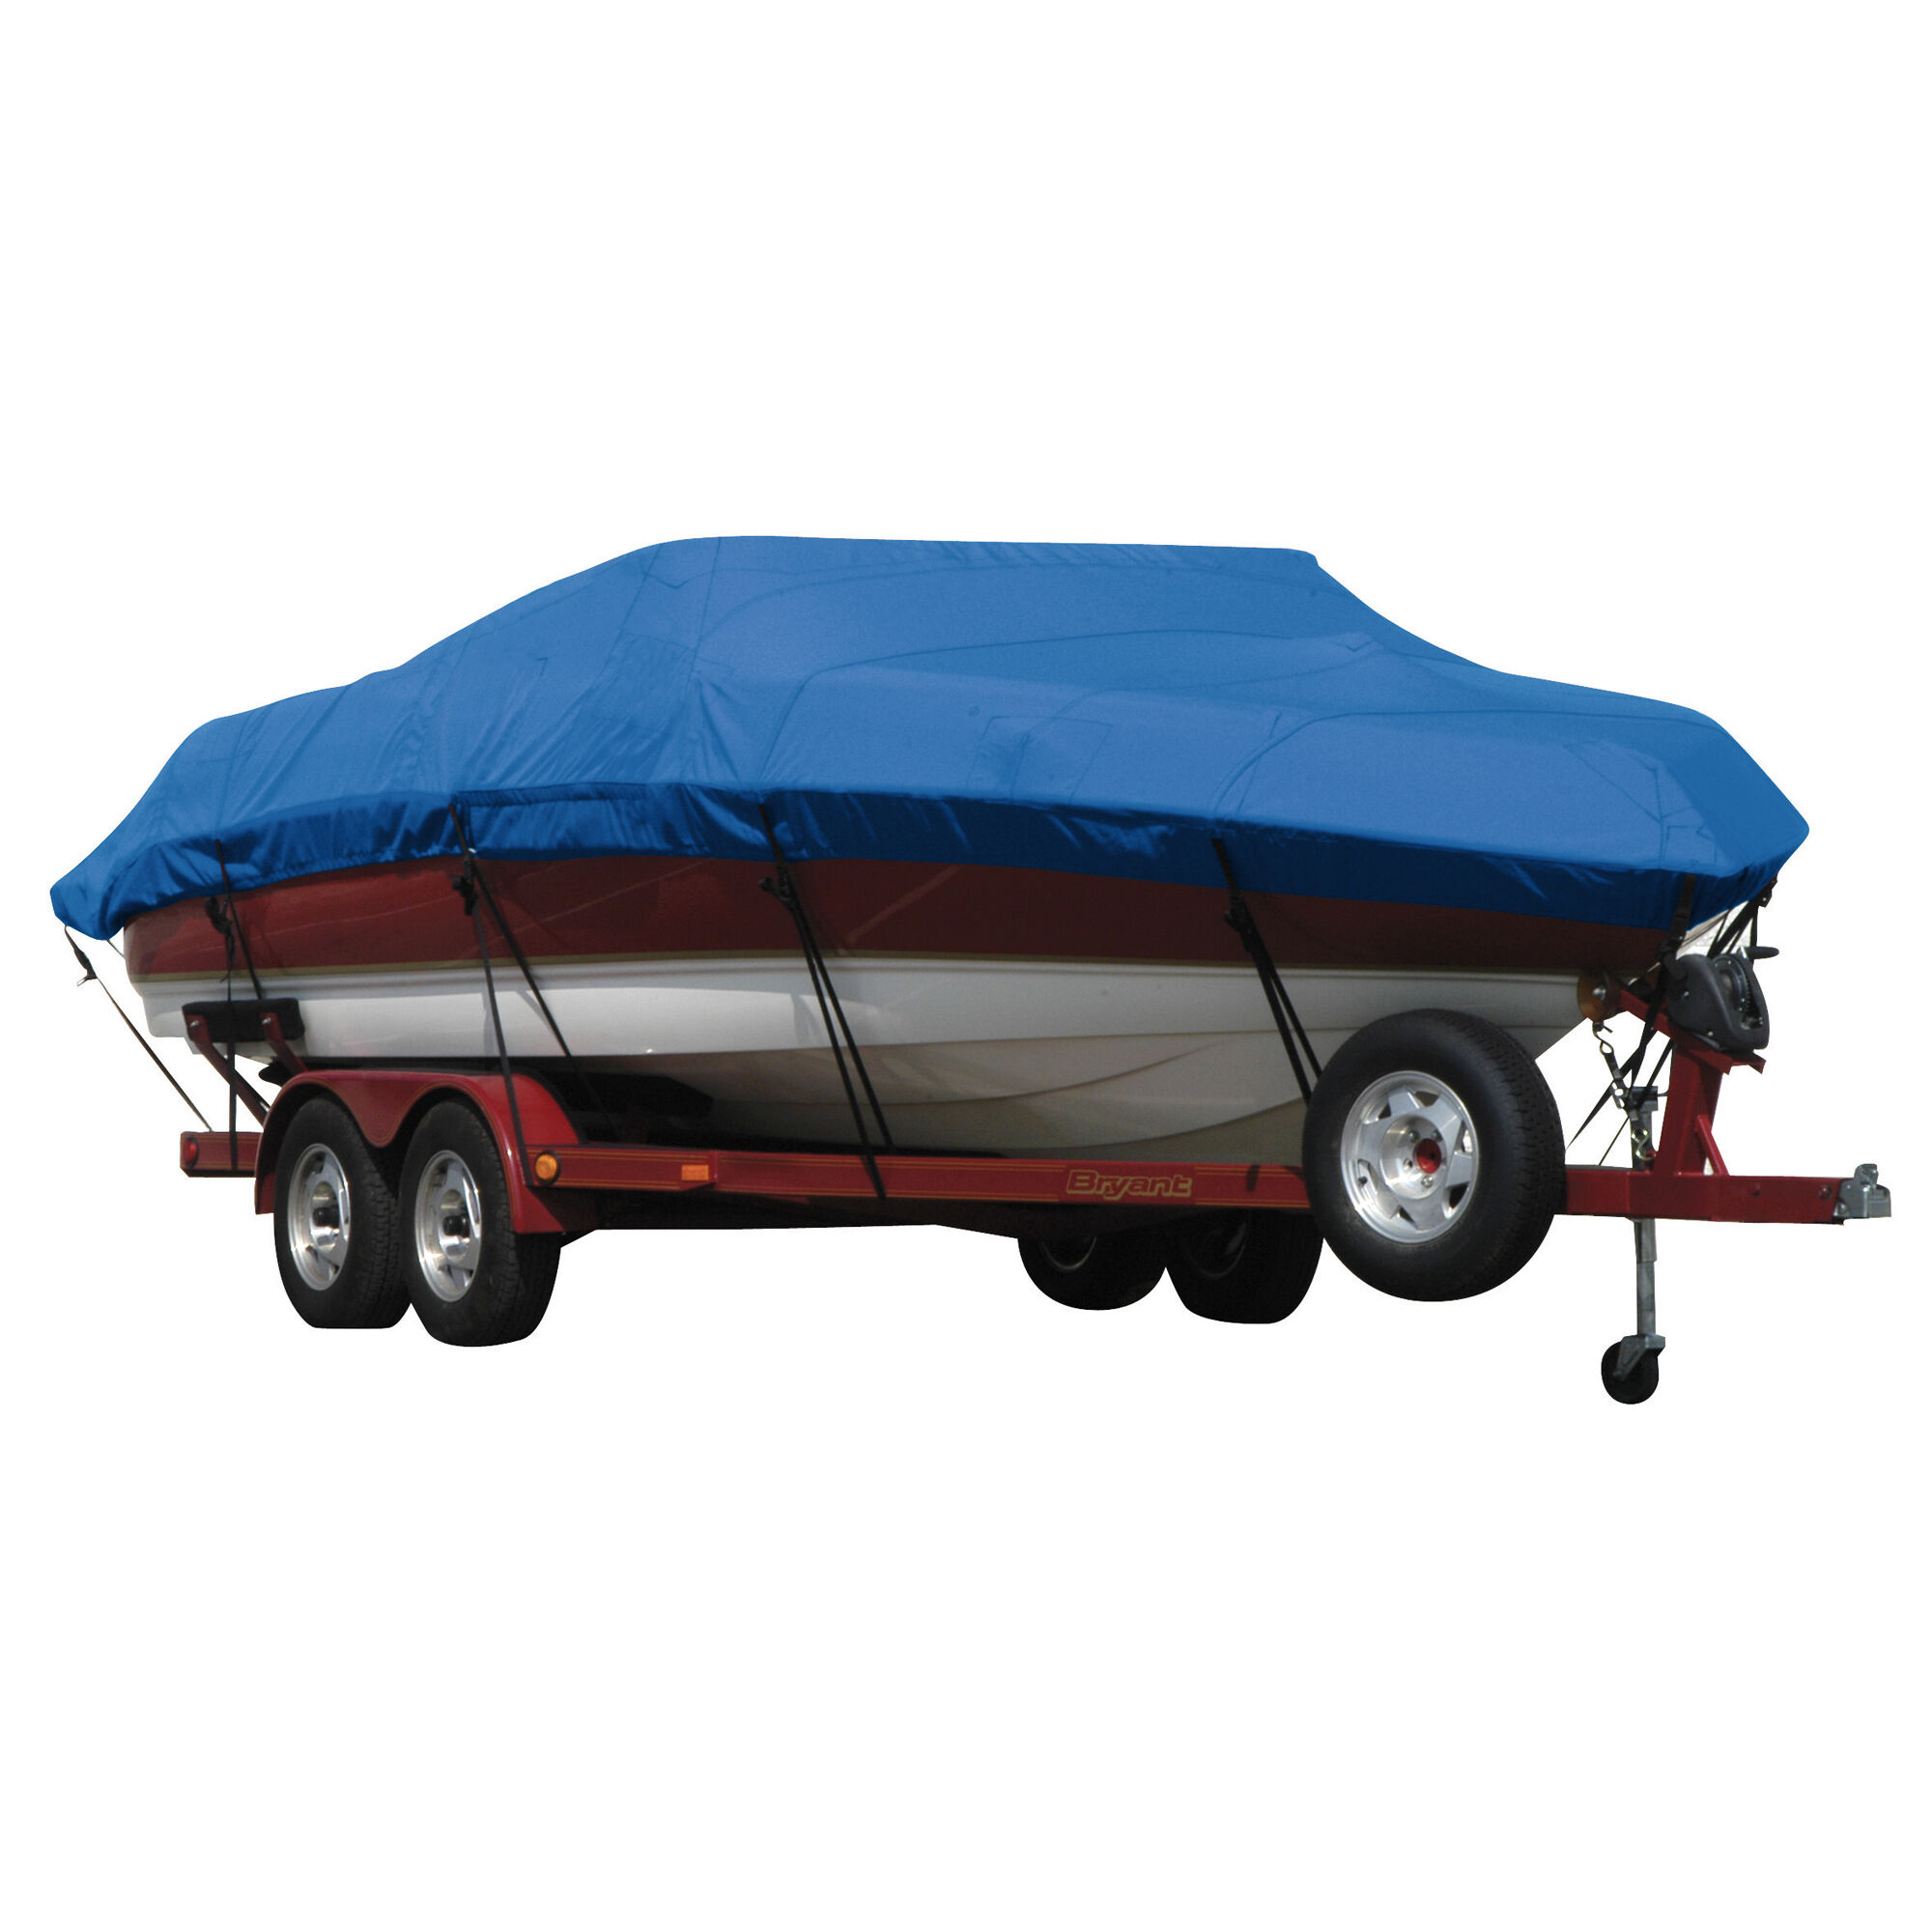 Covermate Exact Fit Sunbrella Boat Cover For Alumacraft Mv 1860 Aw Sc V-Shaped Jon Boat w/ No Trolling Motor O/B in Pacific Blue